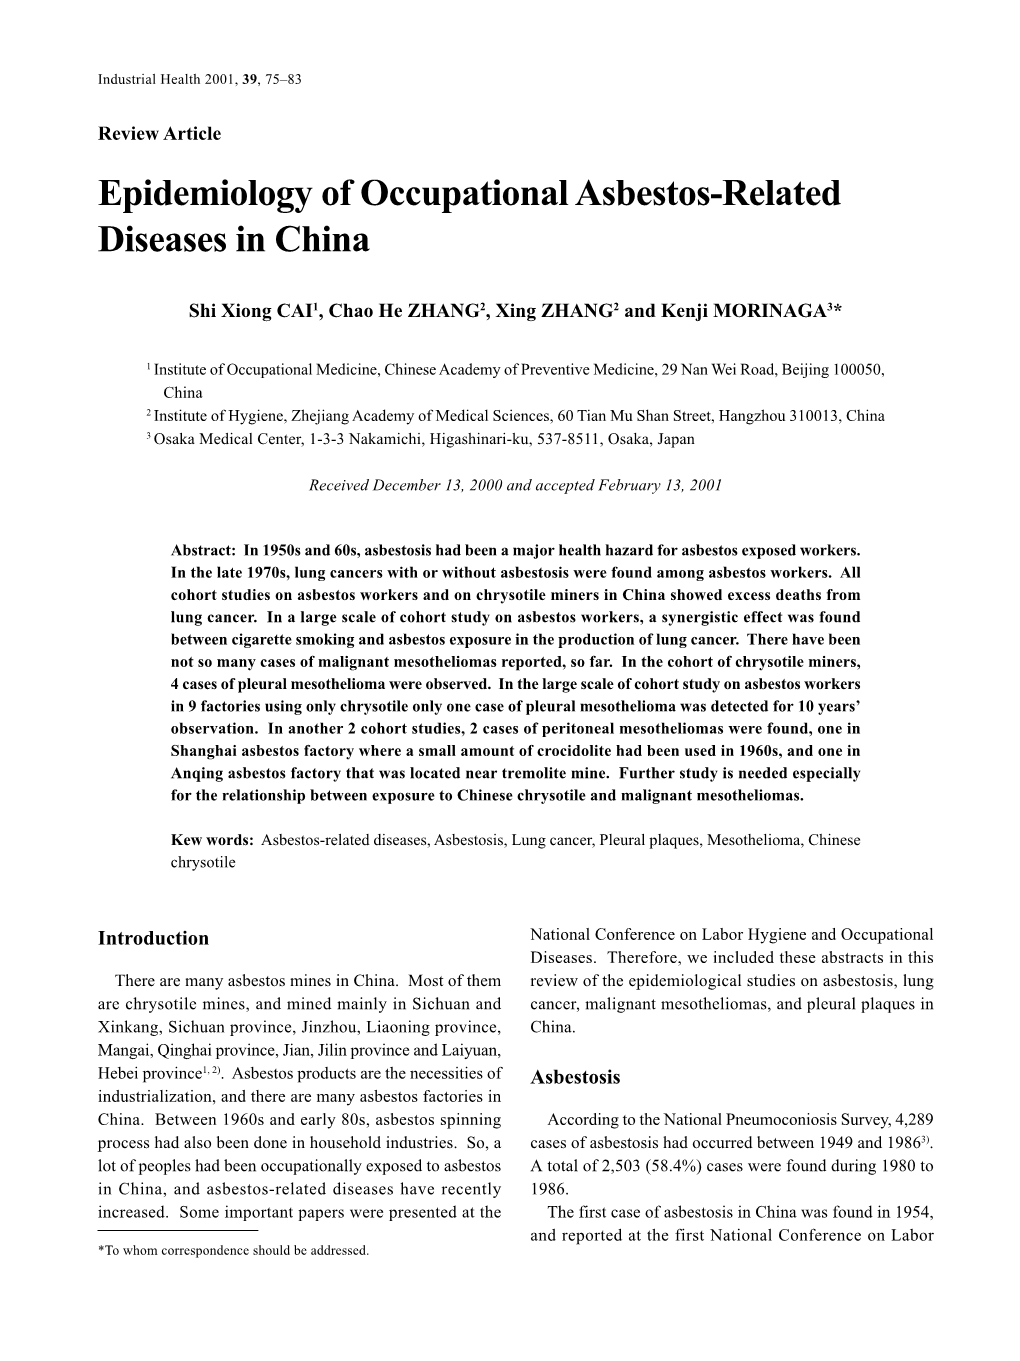 Epidemiology of Occupational Asbestos-Related Diseases in China